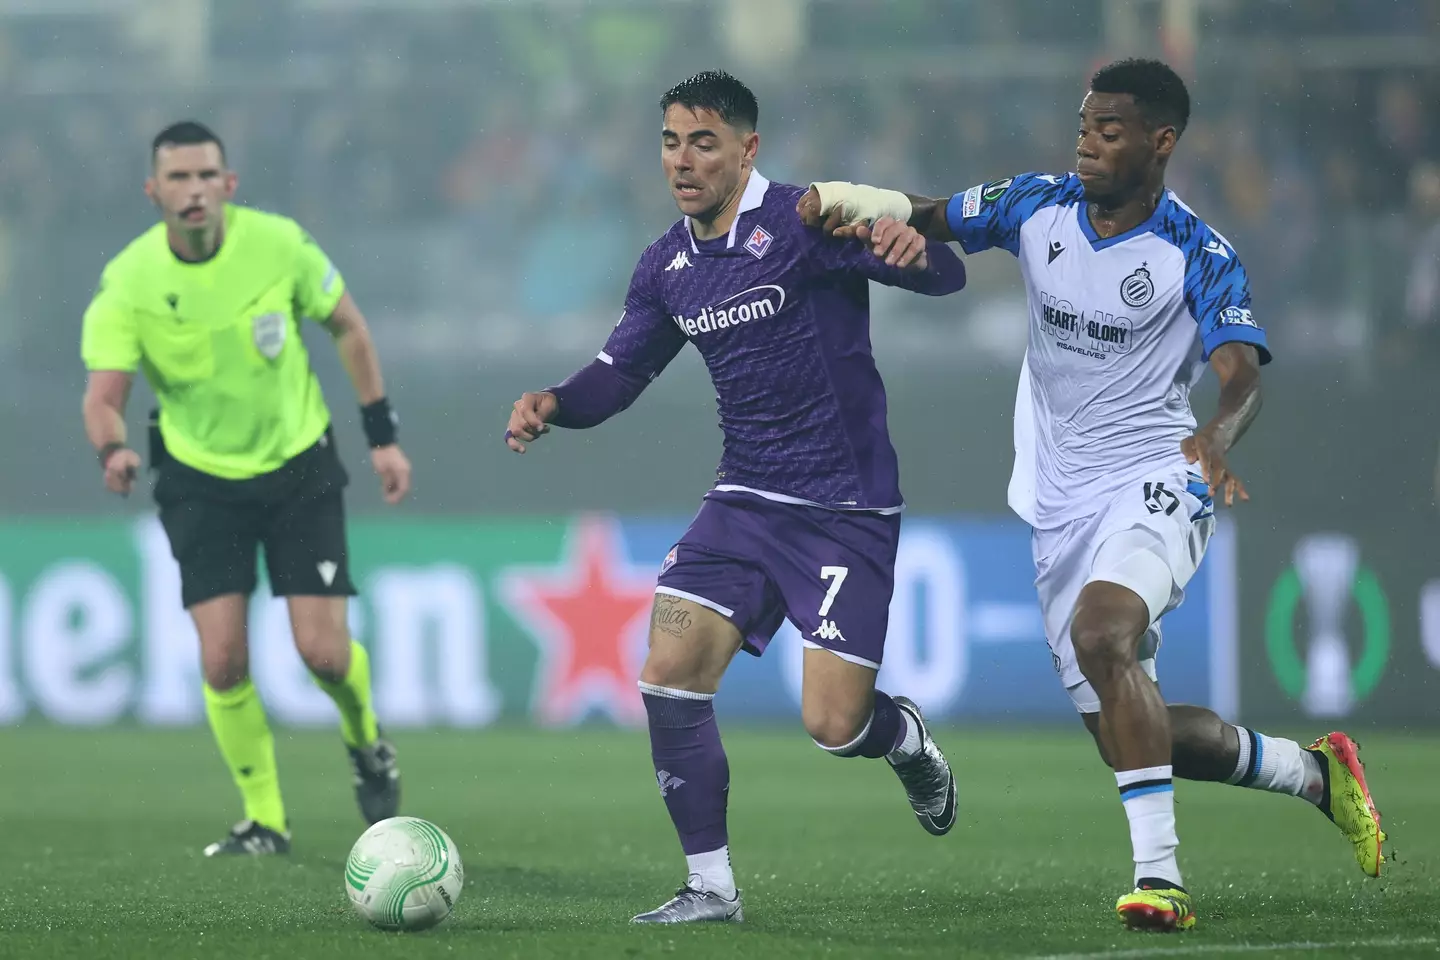 Club Brugge and Fiorentina will play on Wednesday.